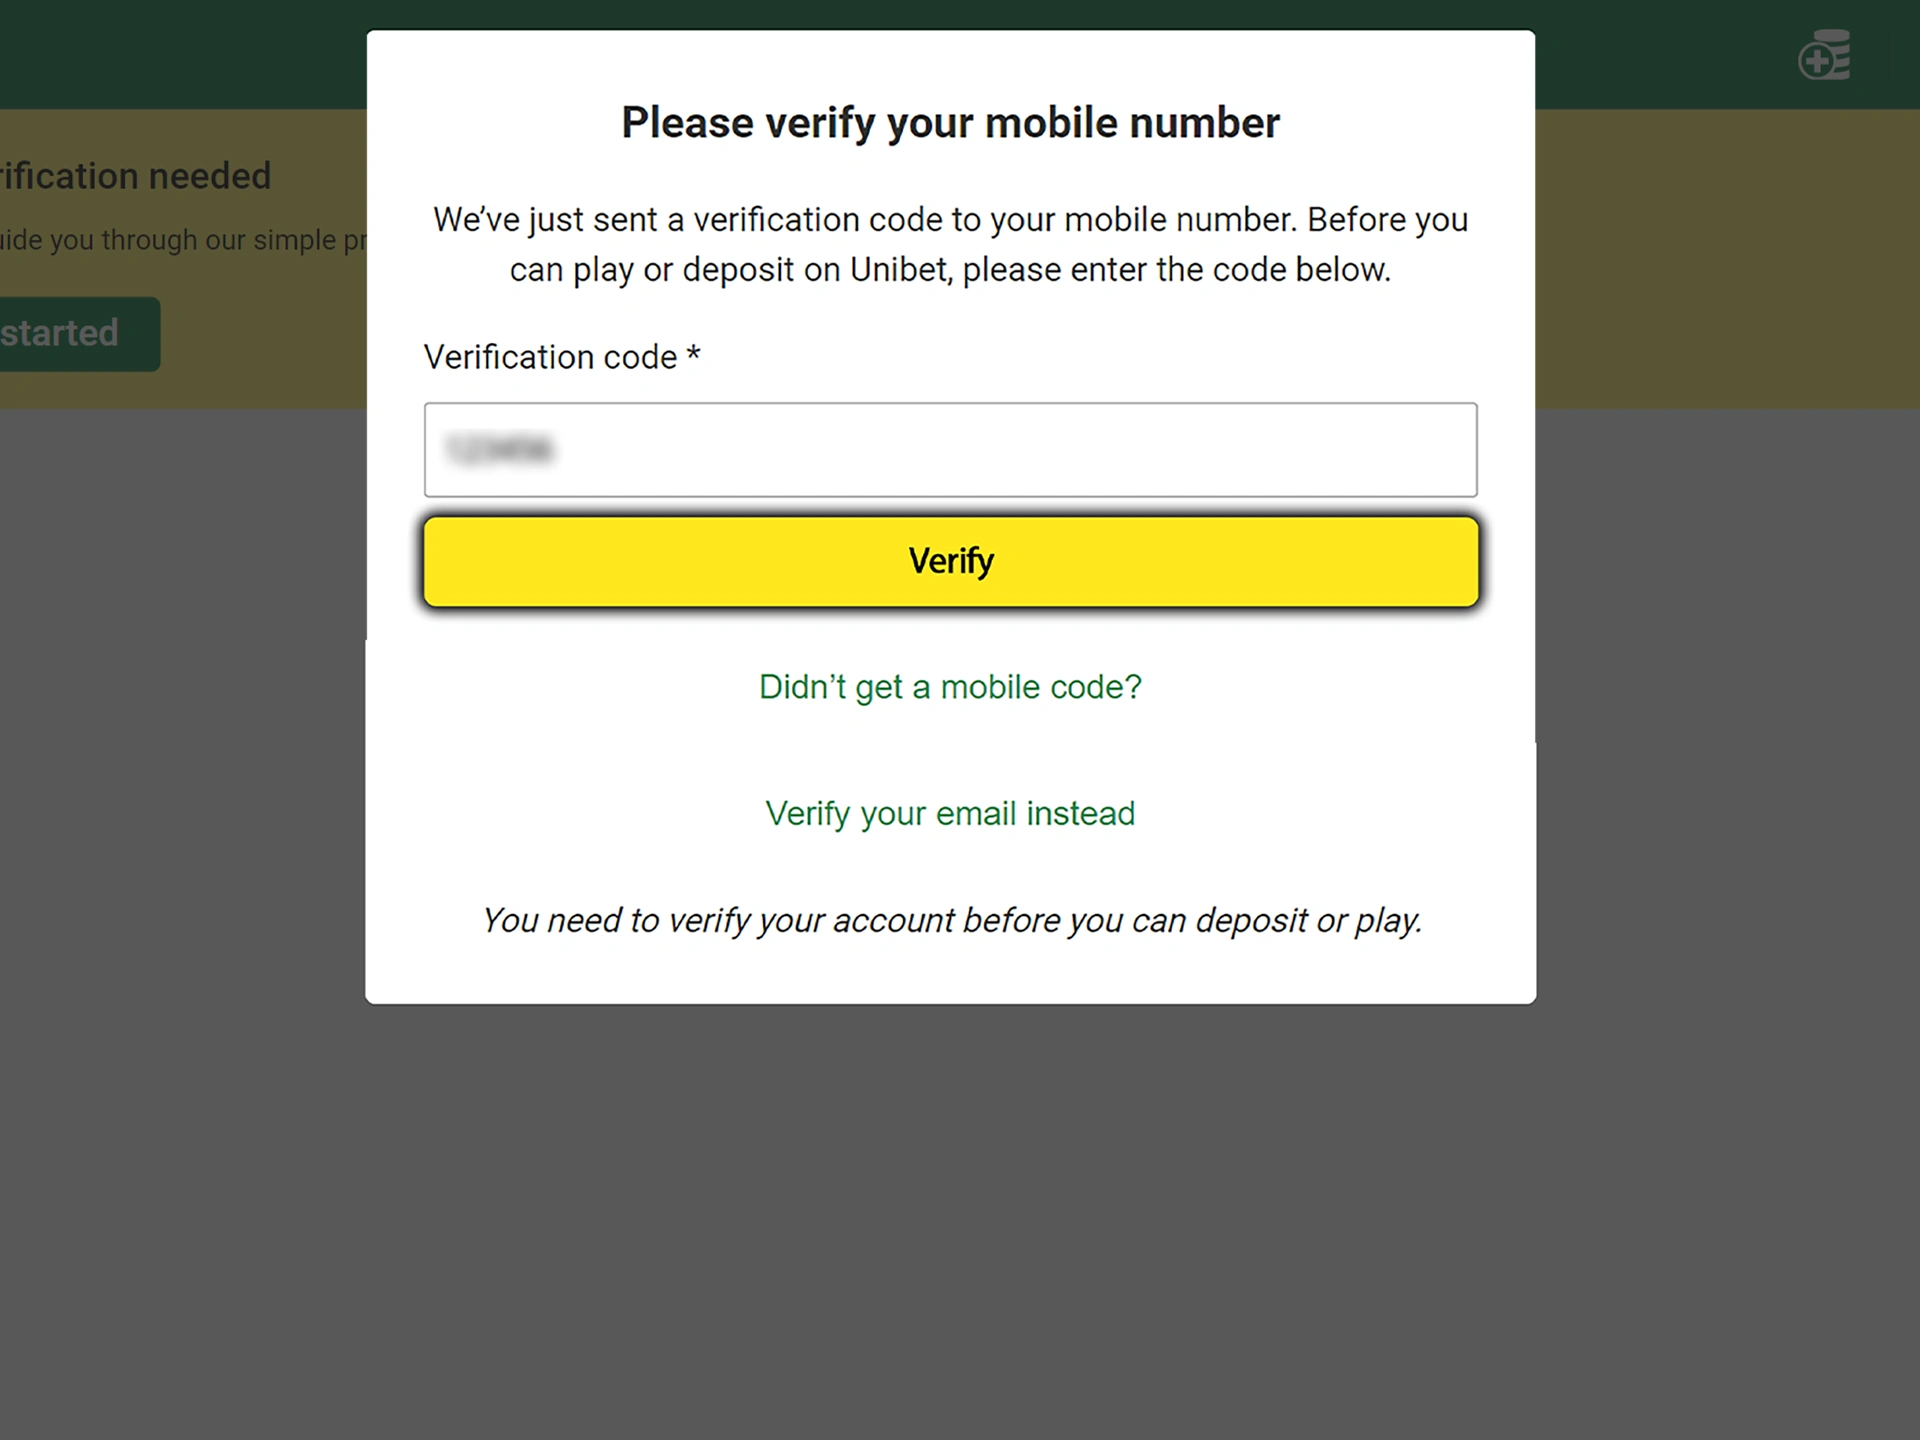 Go through the process of verifying your phone number at Unibet.